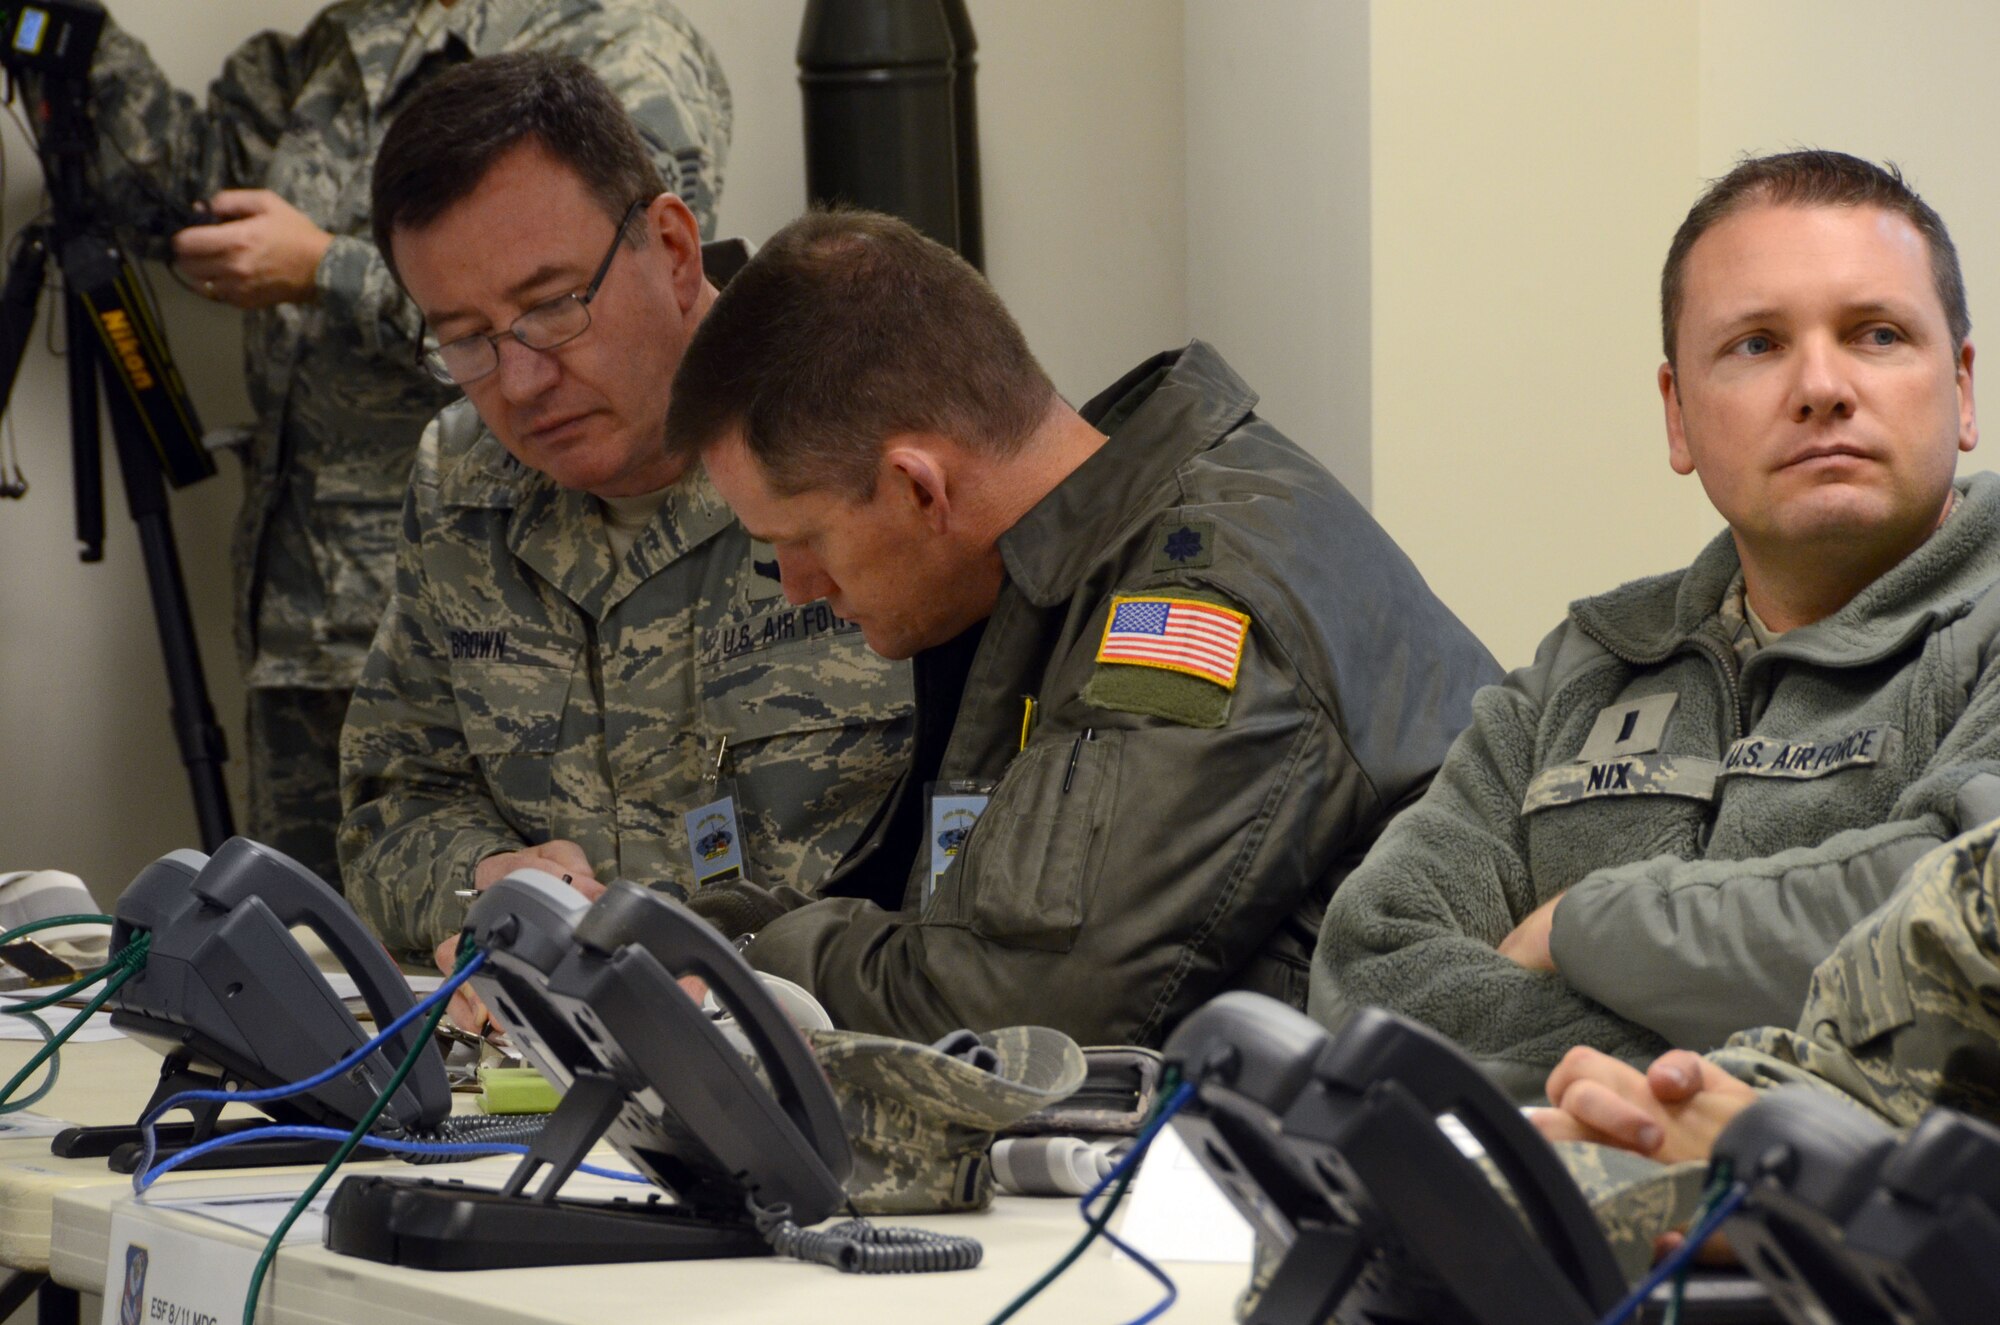 U.S. Air Force Col. Thomas W. Brown, Jr., 145th Airlift Wing, Air Operations Officer, Lt. Col. Miles K. Harkey, commander, 145th Operations Support Squadron and 1st Lt. Michael V. Nix, 145th Maintenance Squadron, all members of the Wing Inspection Team (WIT), review the Master Scenario Event List (MSEL) prior to the Anti-Terrorism Exercise held Nov. 1, 2014, at the North Carolina Air National Guard Base, Charlotte Douglas Intl. Airport. The annual Anti-Terrorism Exercise simulated a car-bomb detonation inside the perimeter of the air base. The exercise initiated force protection measures across the base and tested the Wing’s ability to respond accordingly. After the car-bomb detonation, Airmen also performed simulated search and recovery procedures. (U.S. Air National Guard photo by Master Sgt. Patricia F. Moran, 145th Public Affairs/Released)